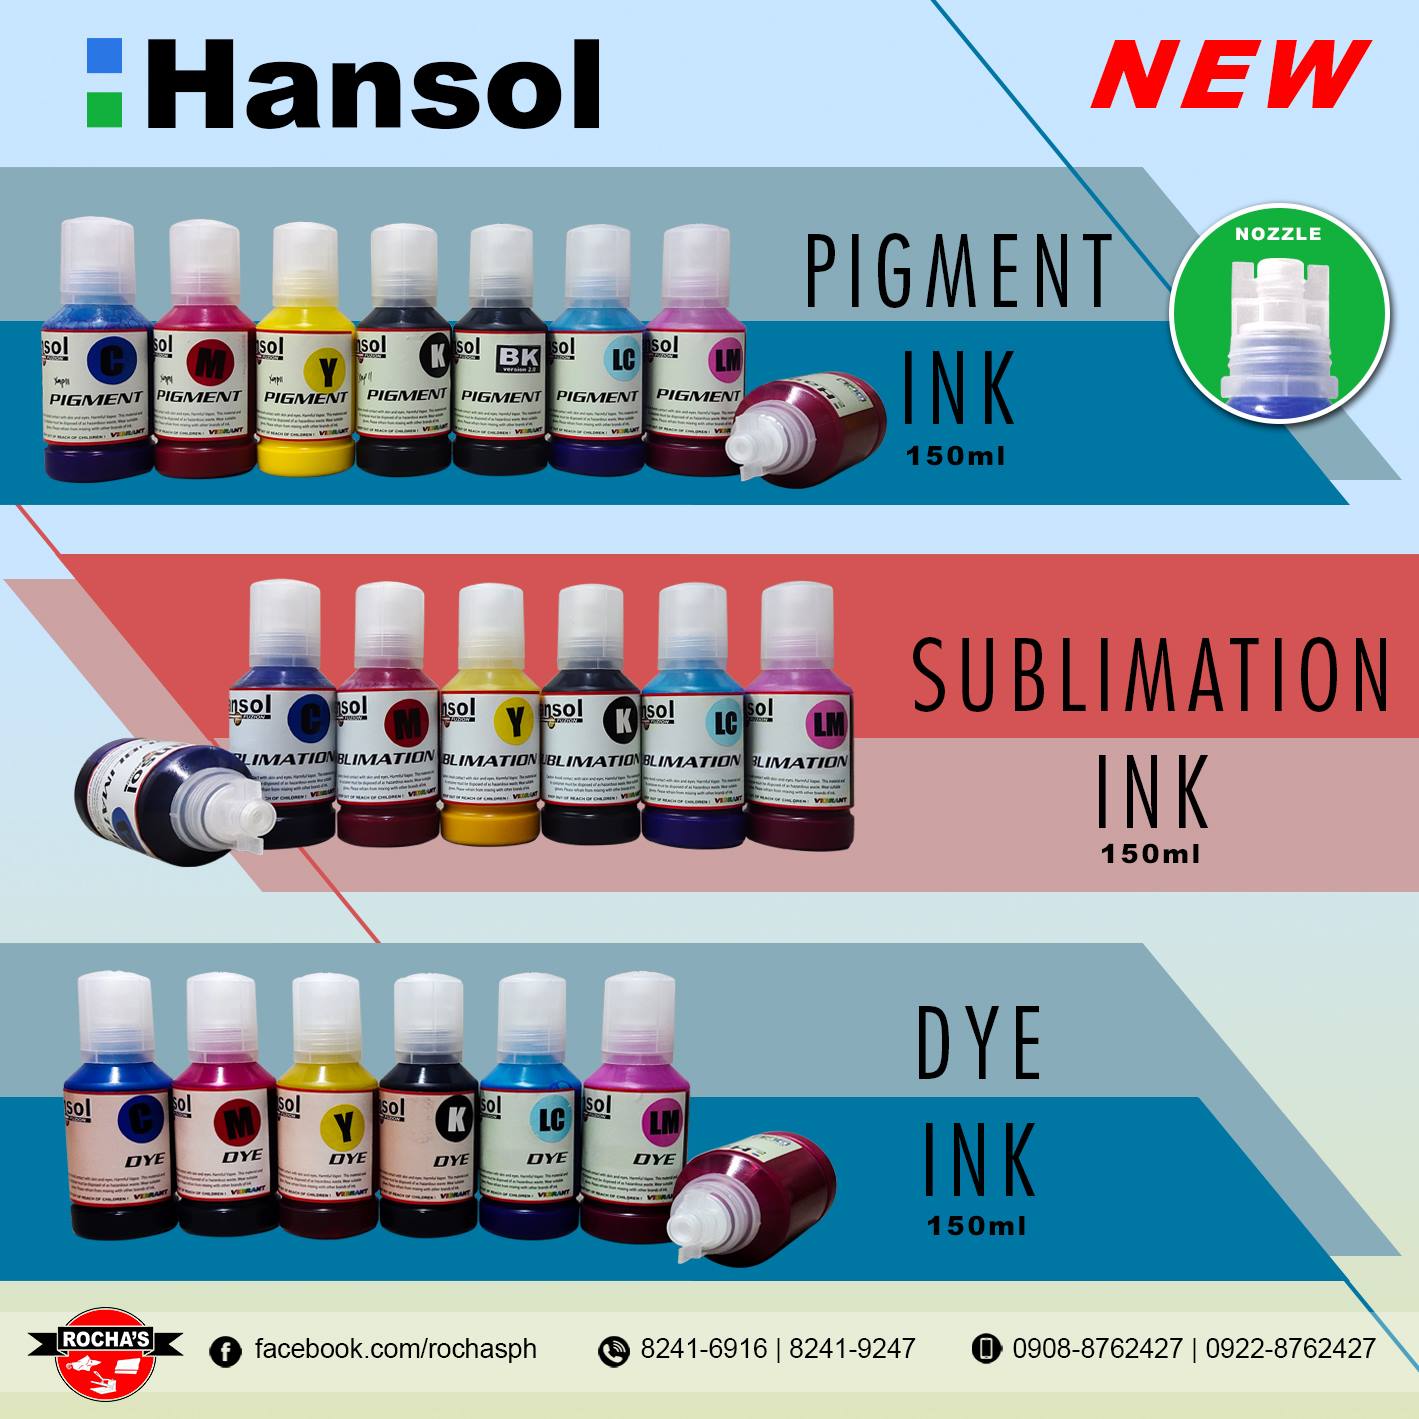 You are currently viewing Hansol Inks – Dye, Sublimation or Pigment Ink